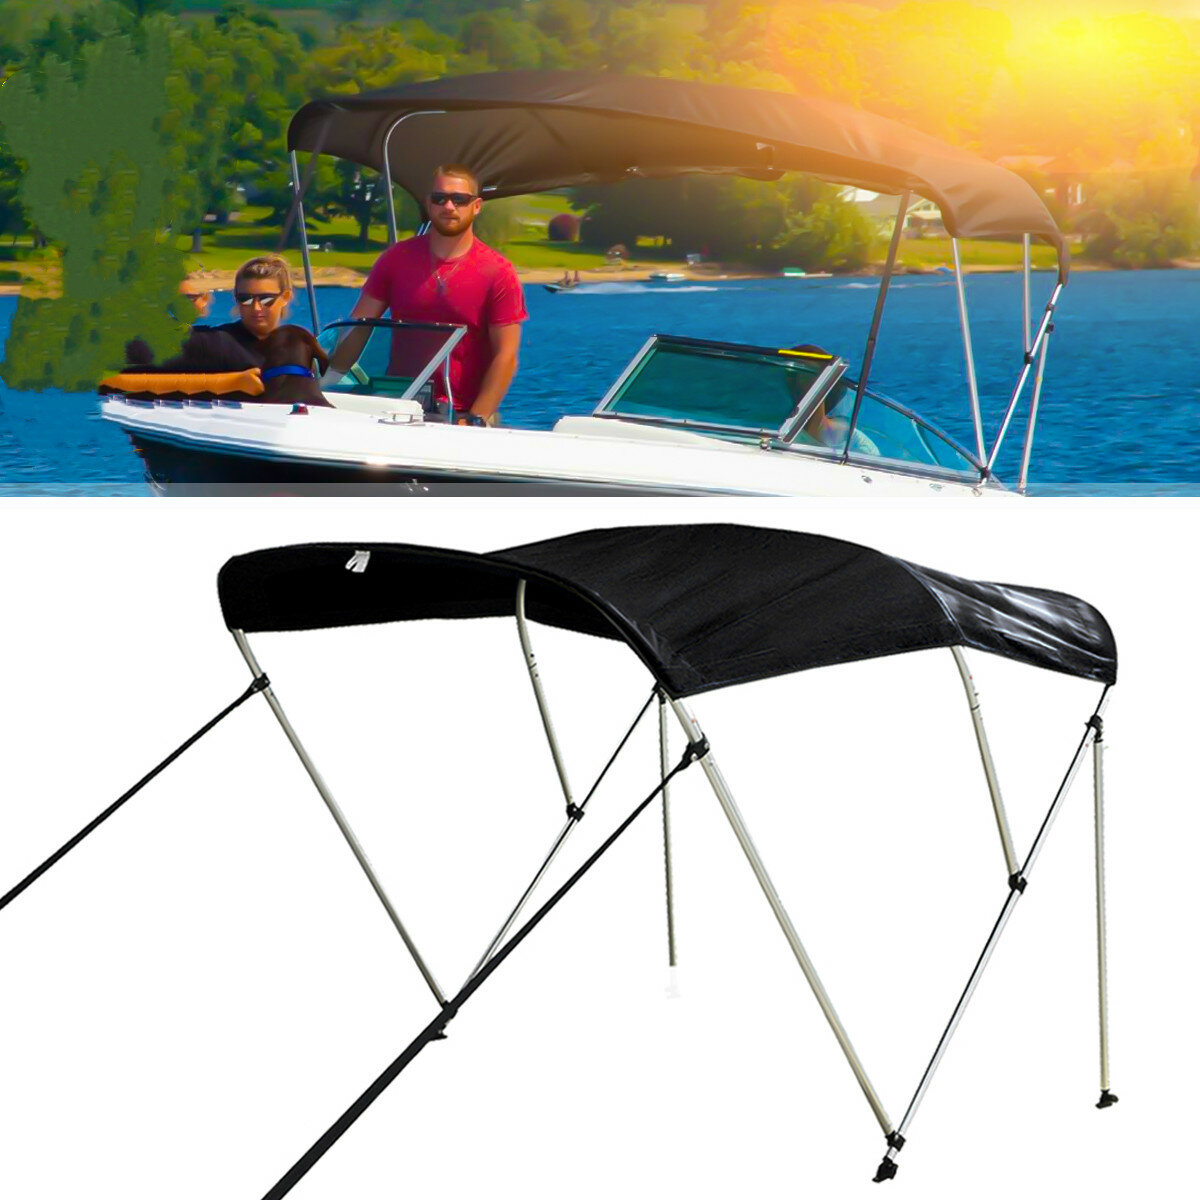 Image of 3 Bow Bimini Top Replacement Canvas Cover Boot Cover W/Rear Poles UV Resistant